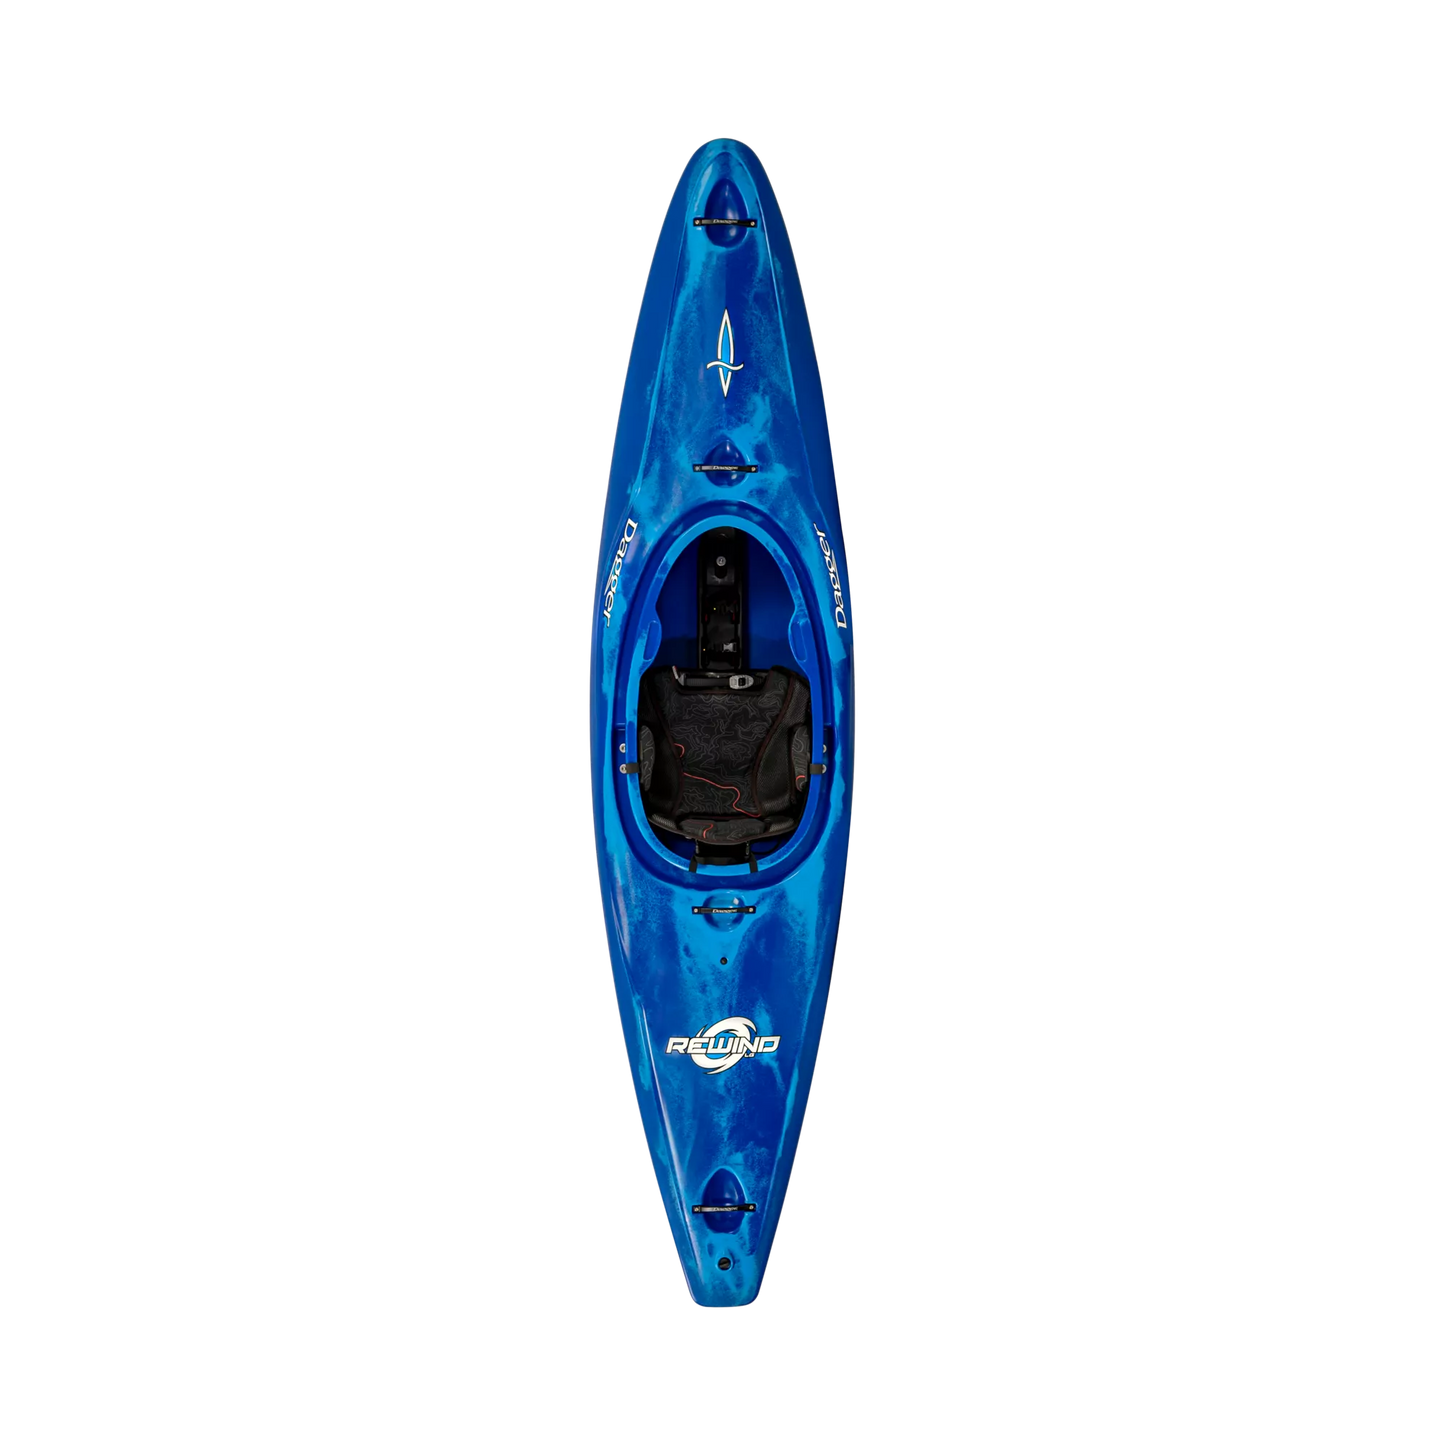 Blue Smoke Dagger Rewind whitewater river play kayak with Contour Ergo Outfitting and new thigh brace system.